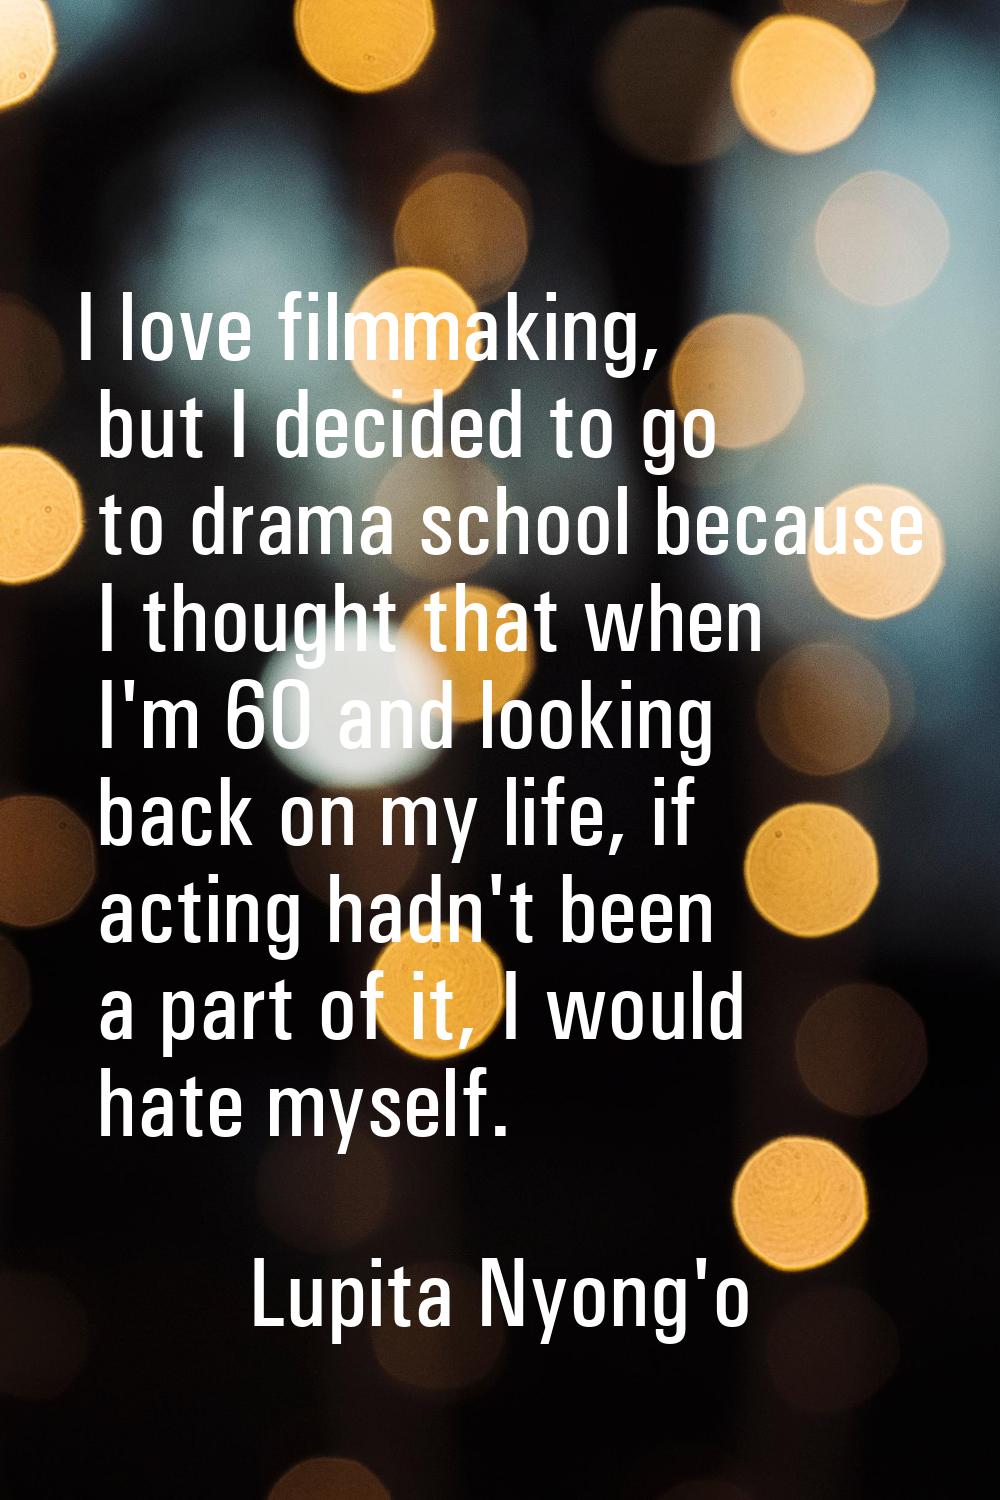 I love filmmaking, but I decided to go to drama school because I thought that when I'm 60 and looki